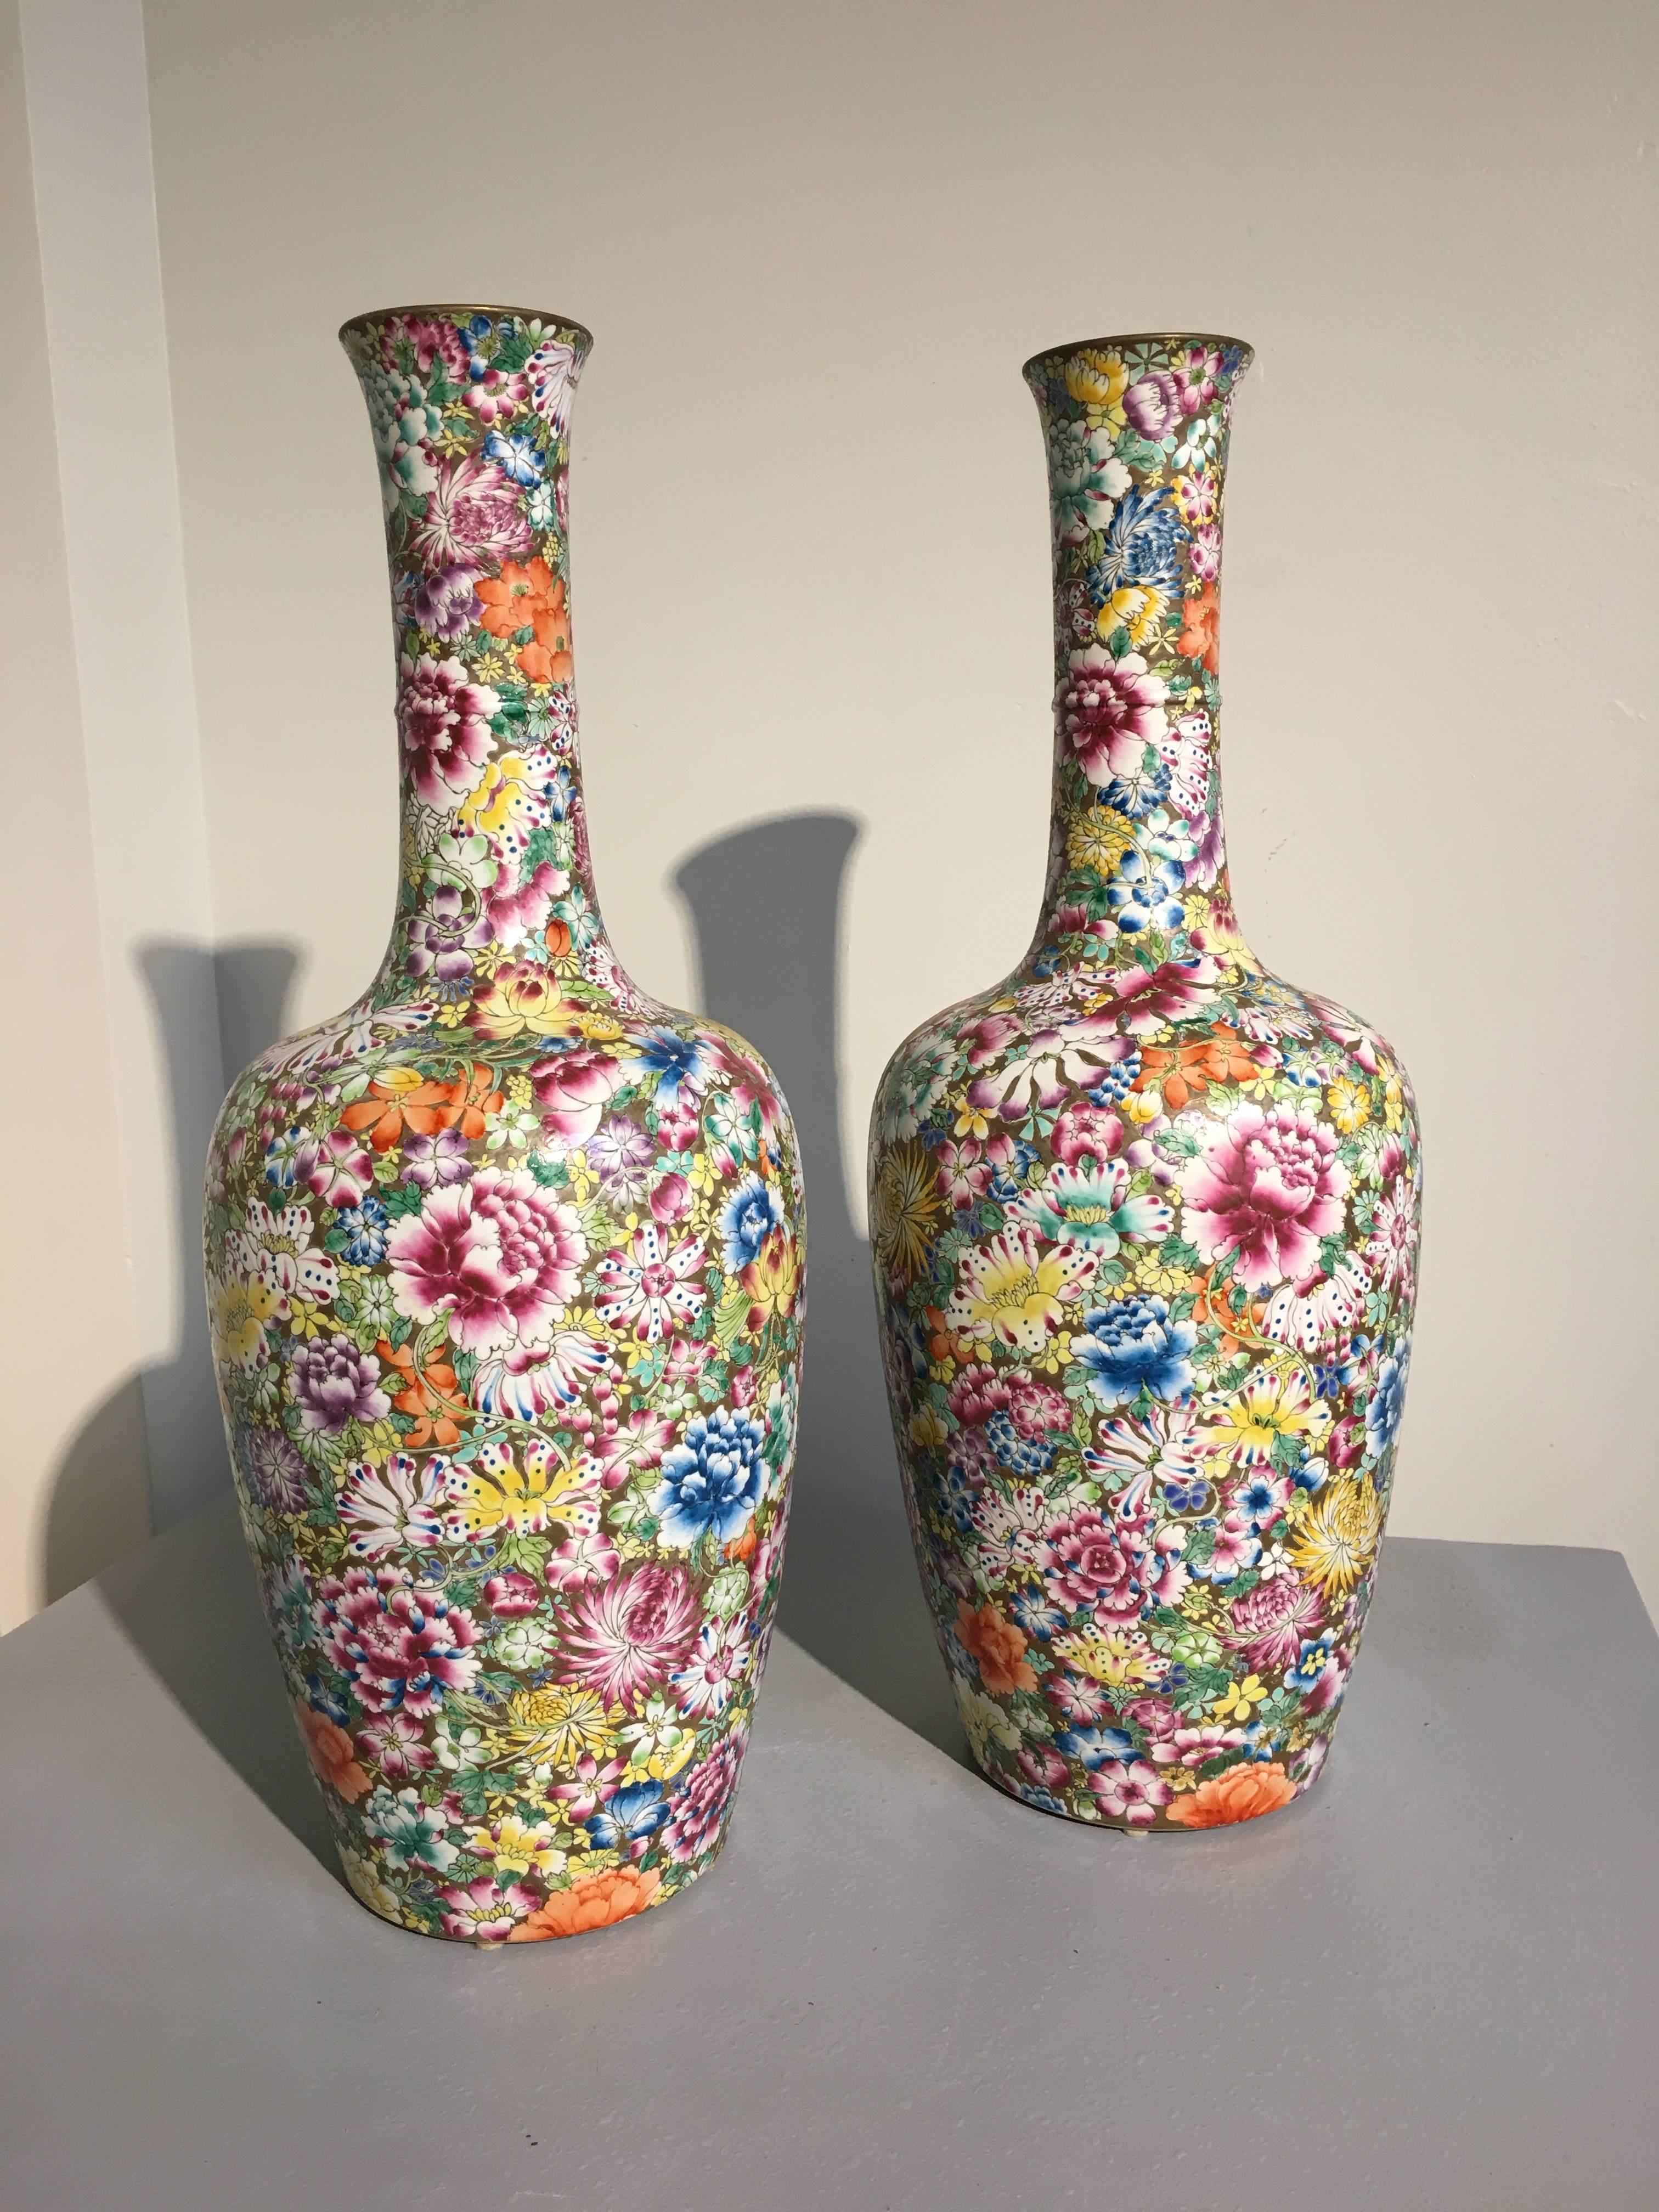 A stunning pair of marked Chinese famille rose enameled millefleurs tall porcelain vases, Republic Period. 
The vases painted in bright and exuberant famille rose enamels in the millefleurs or thousand flowers, pattern upon a gilt ground. Their